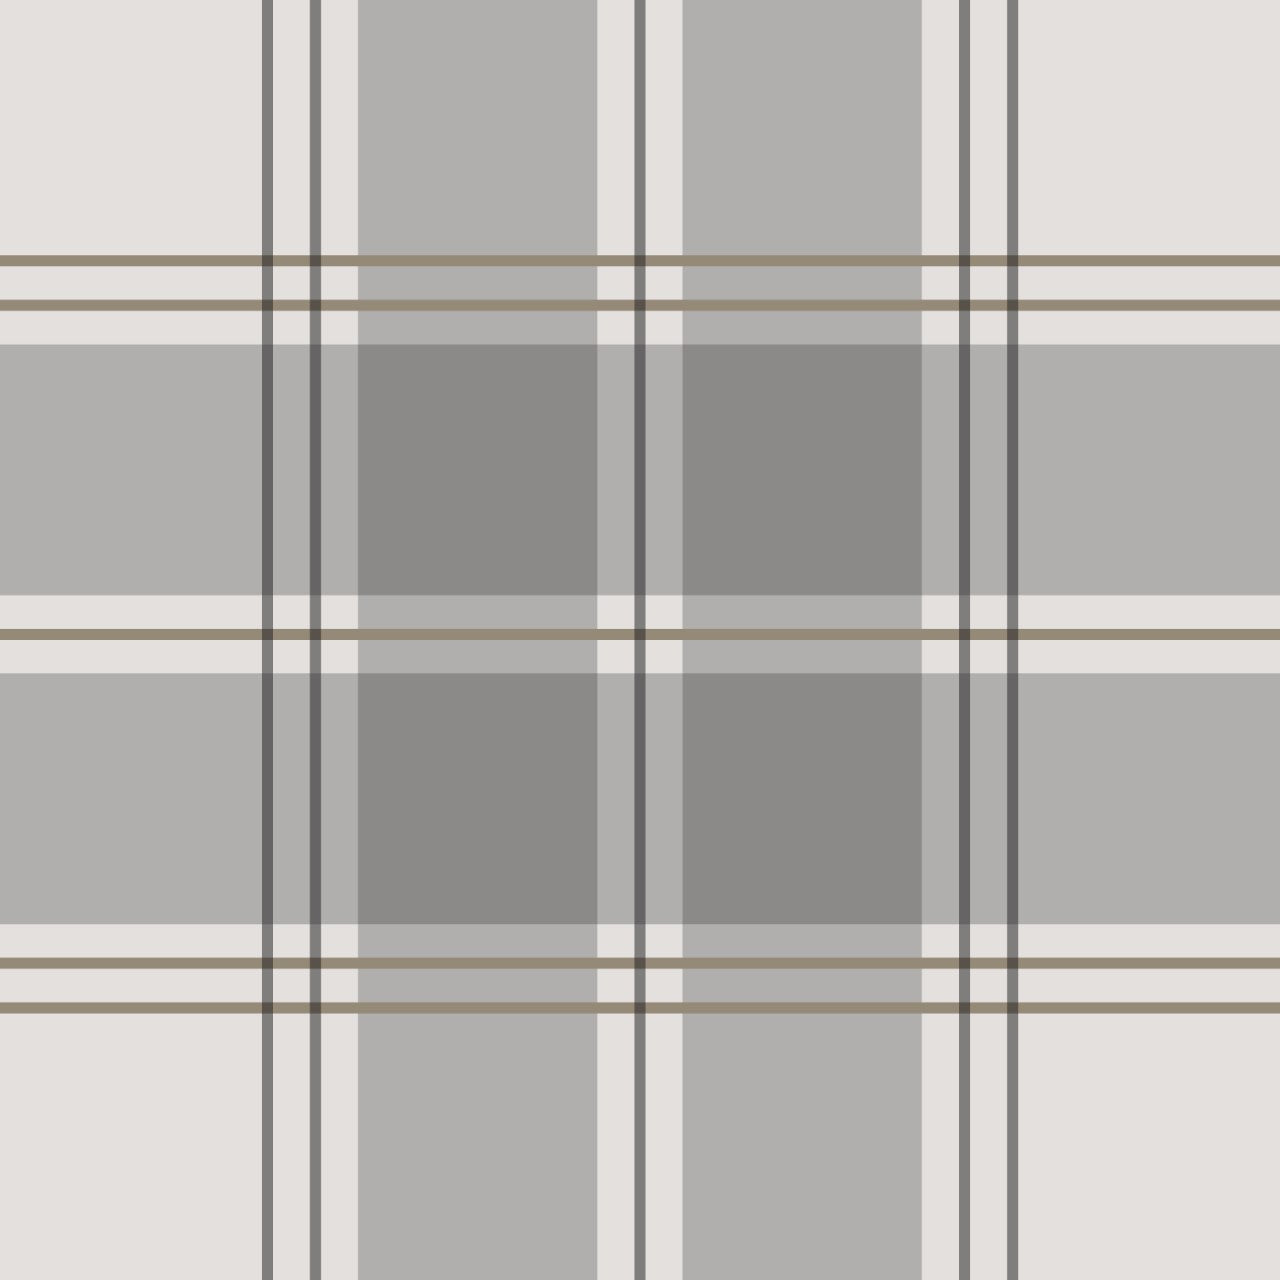 Timeless plaid grey/gray large scale print easy to install and remove peel and stick custom wallpaper available in different lengths/sizes locally created and printed in Canada wallpaper. Washable, durable, commercial grade, removable and waterproof.